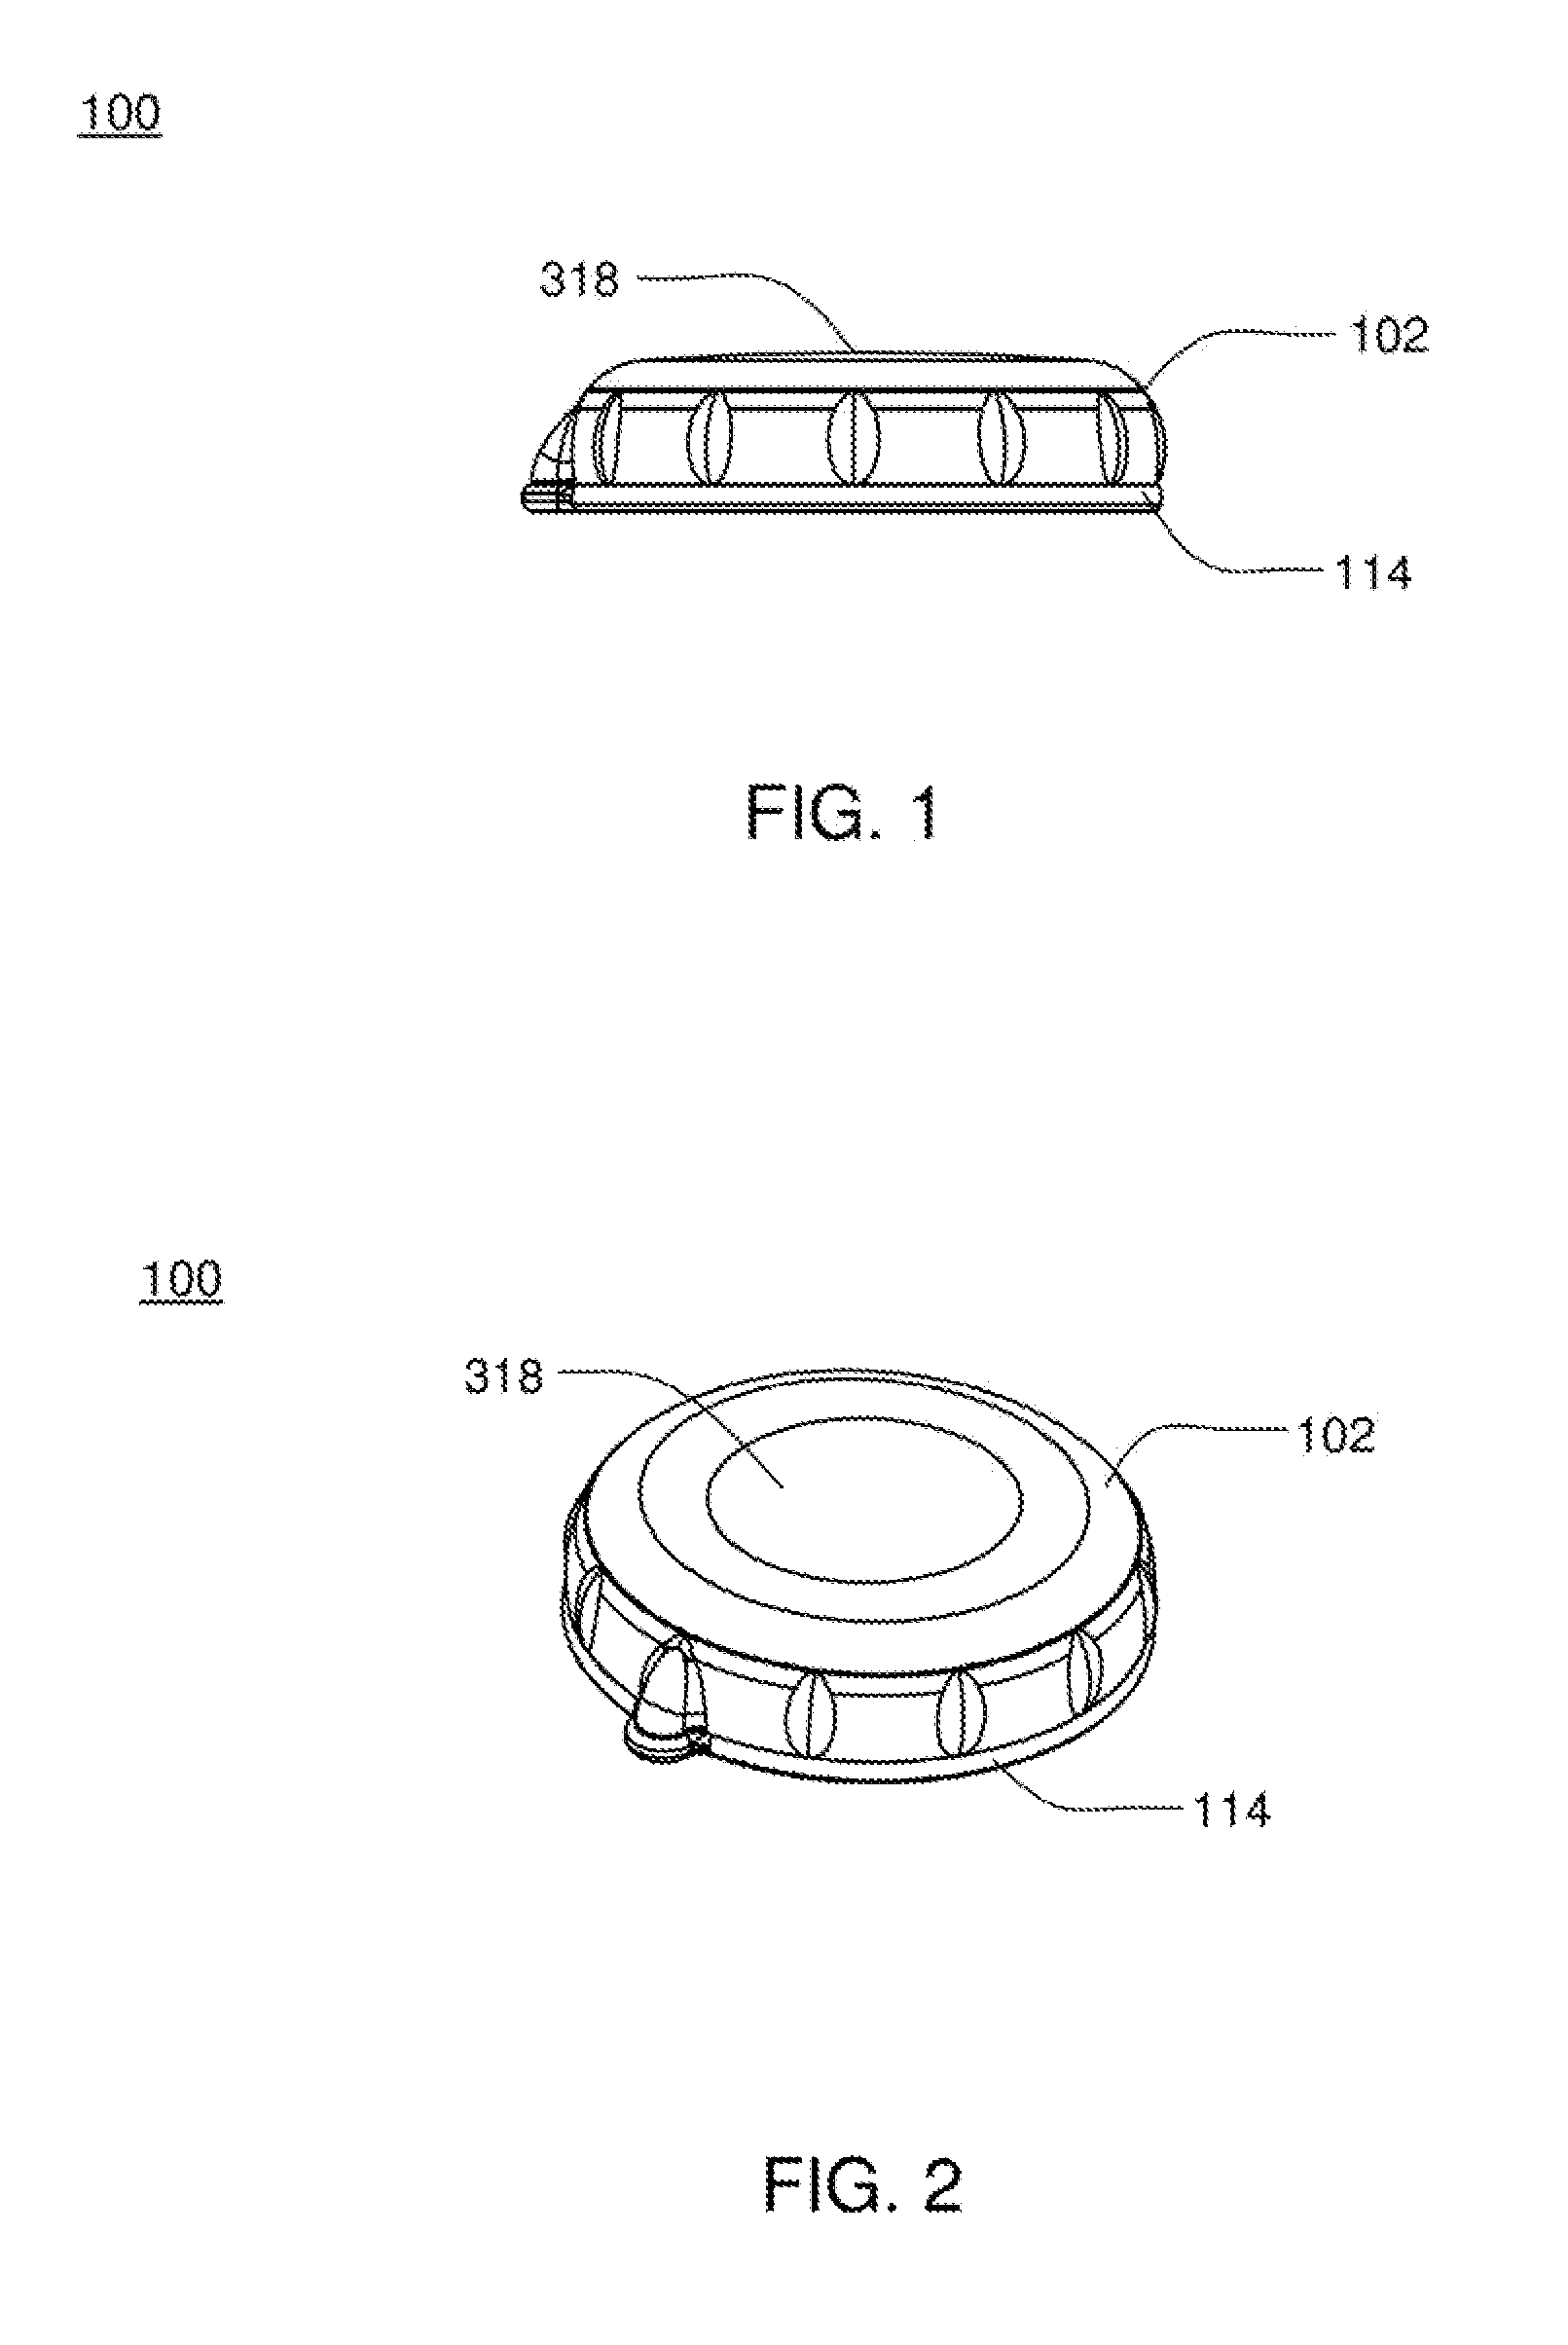 Split ring resonator antenna adapted for use in wirelessly controlled medical device